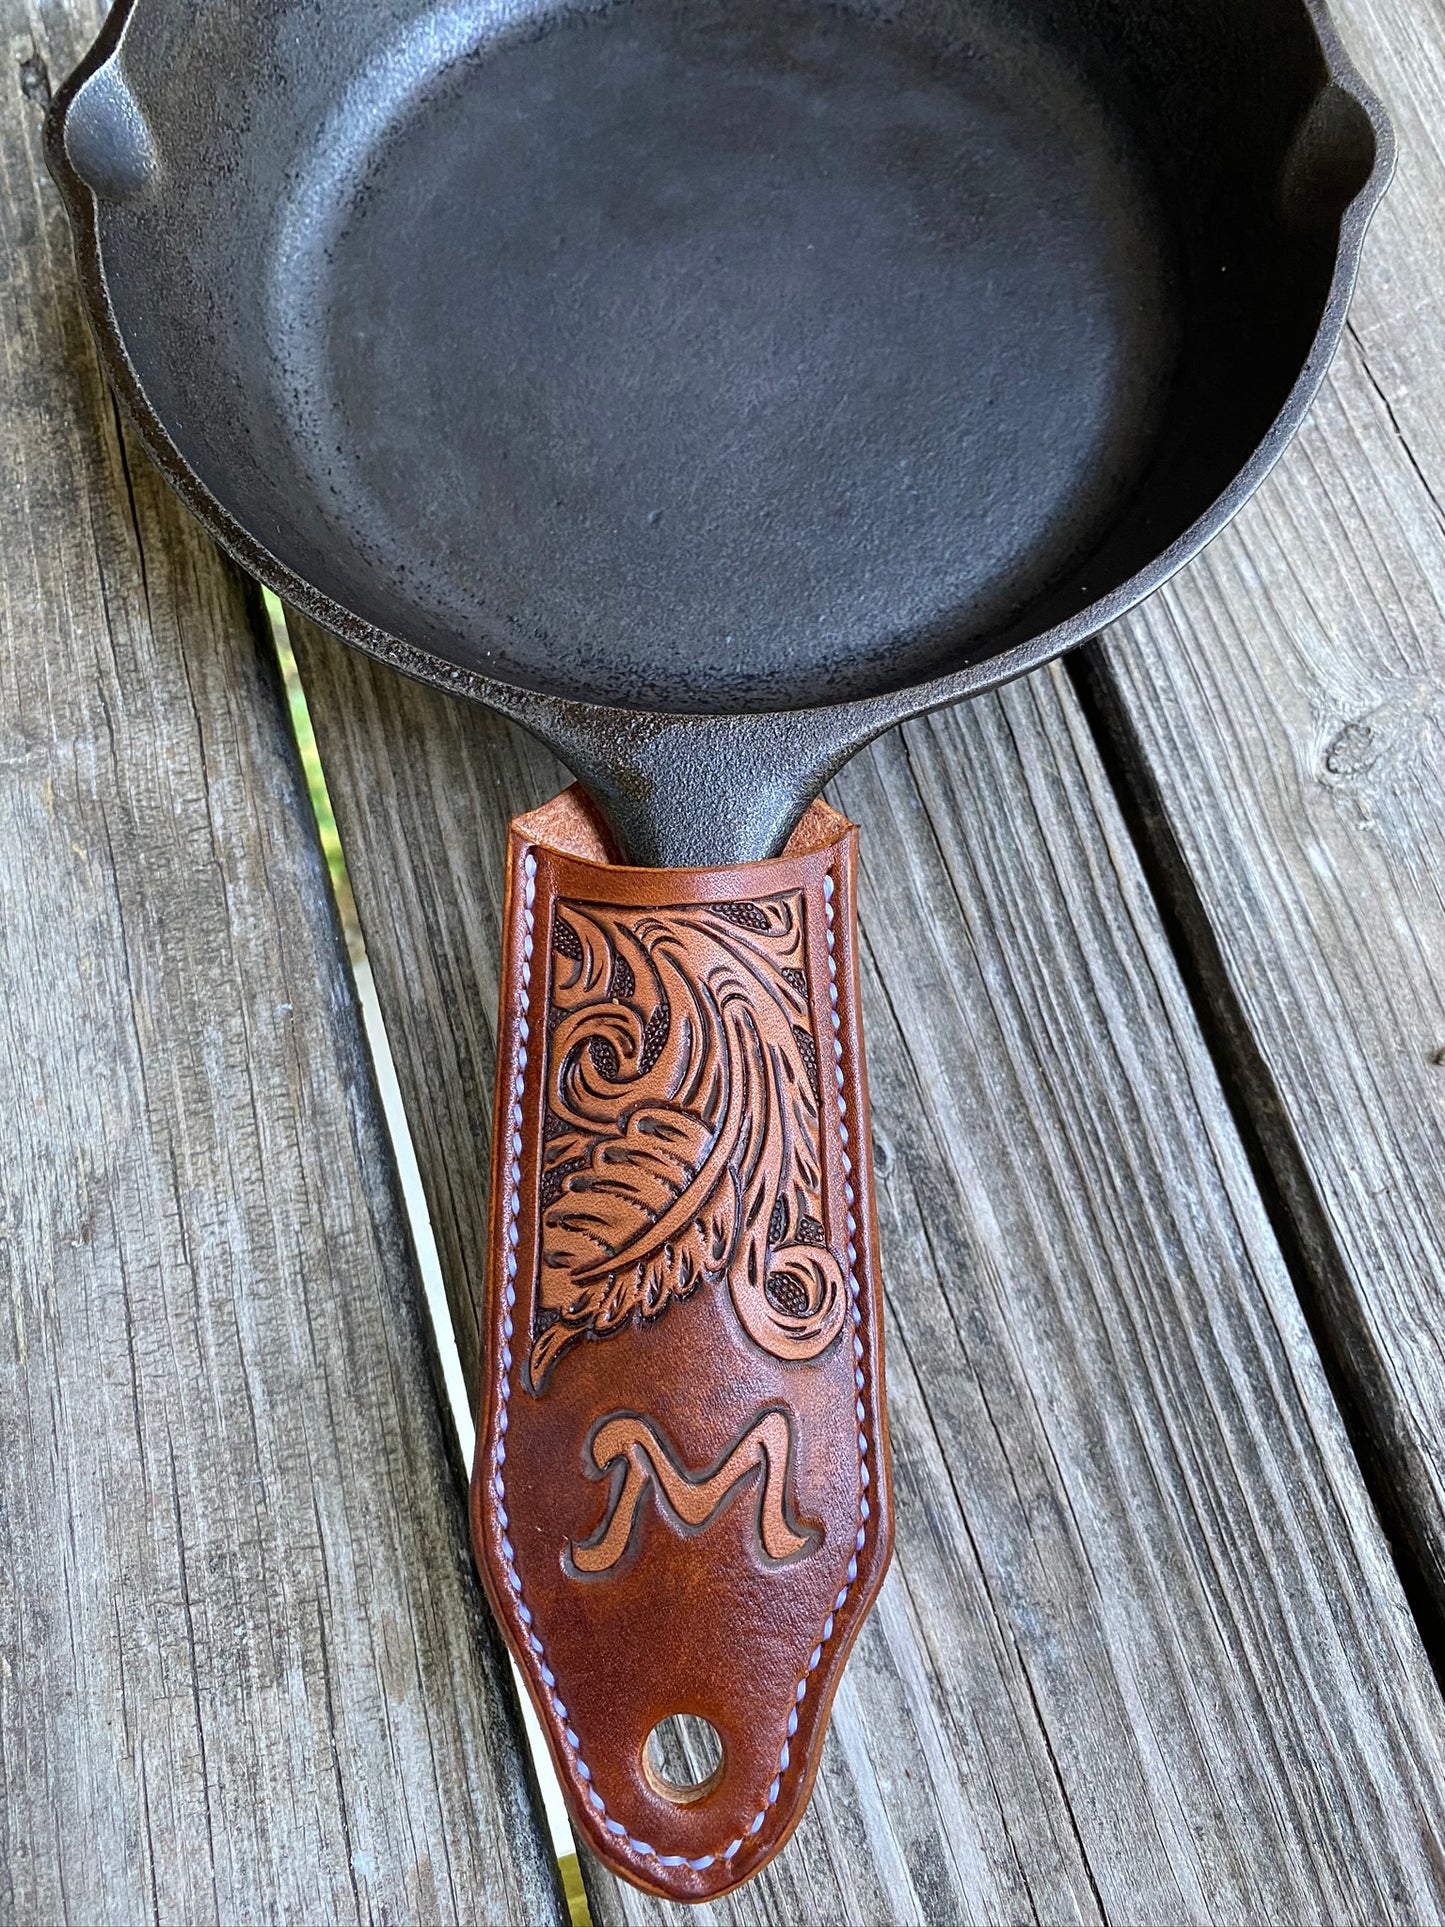 How to Sew a Cast Iron Skillet Handle Cover